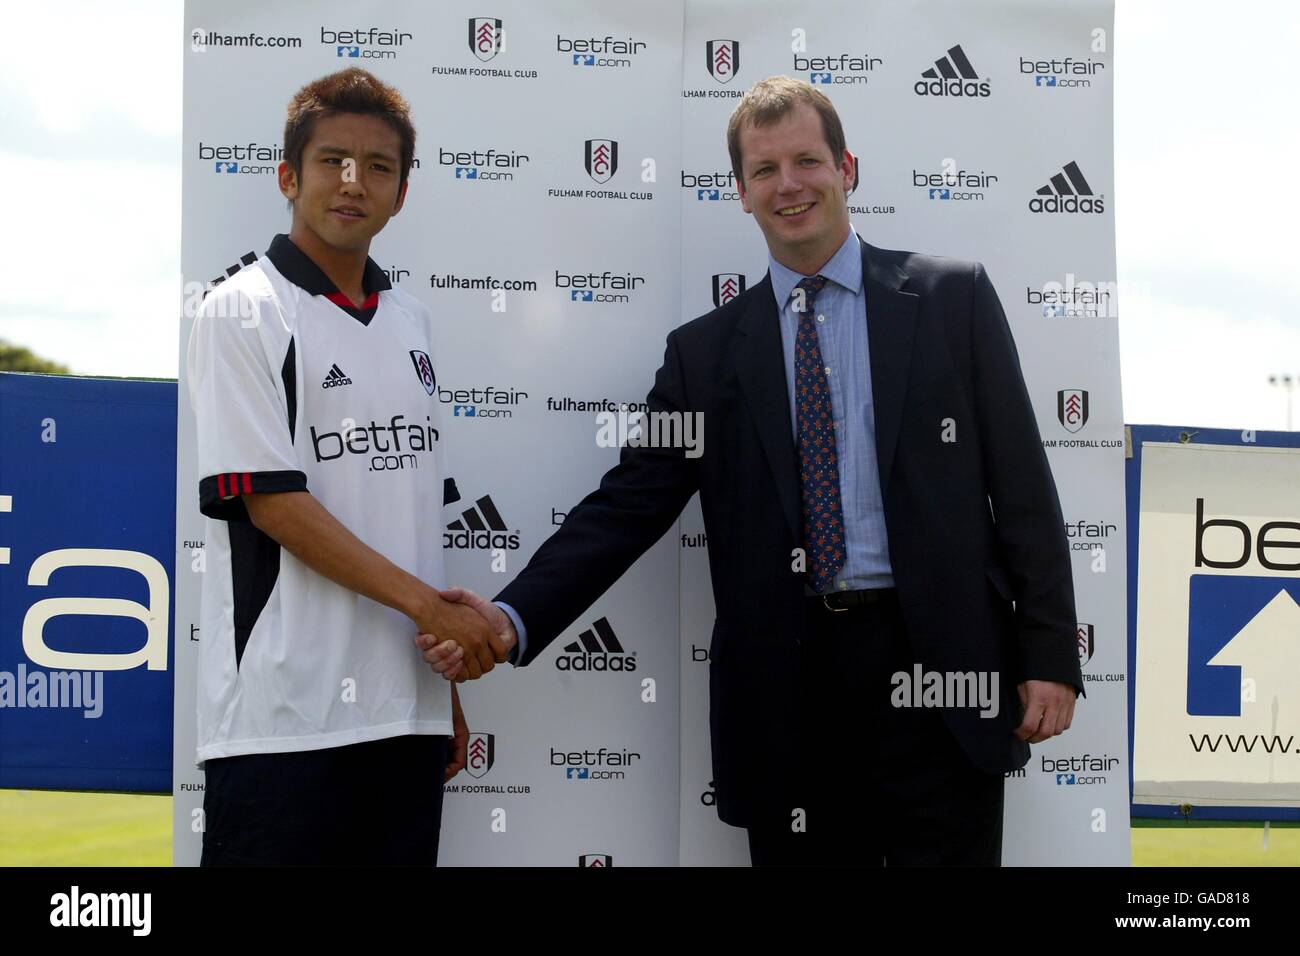 Soccer - Fulham Press Conference. Fulham's Junichi Inamoto with new sponsors betfair Stock Photo